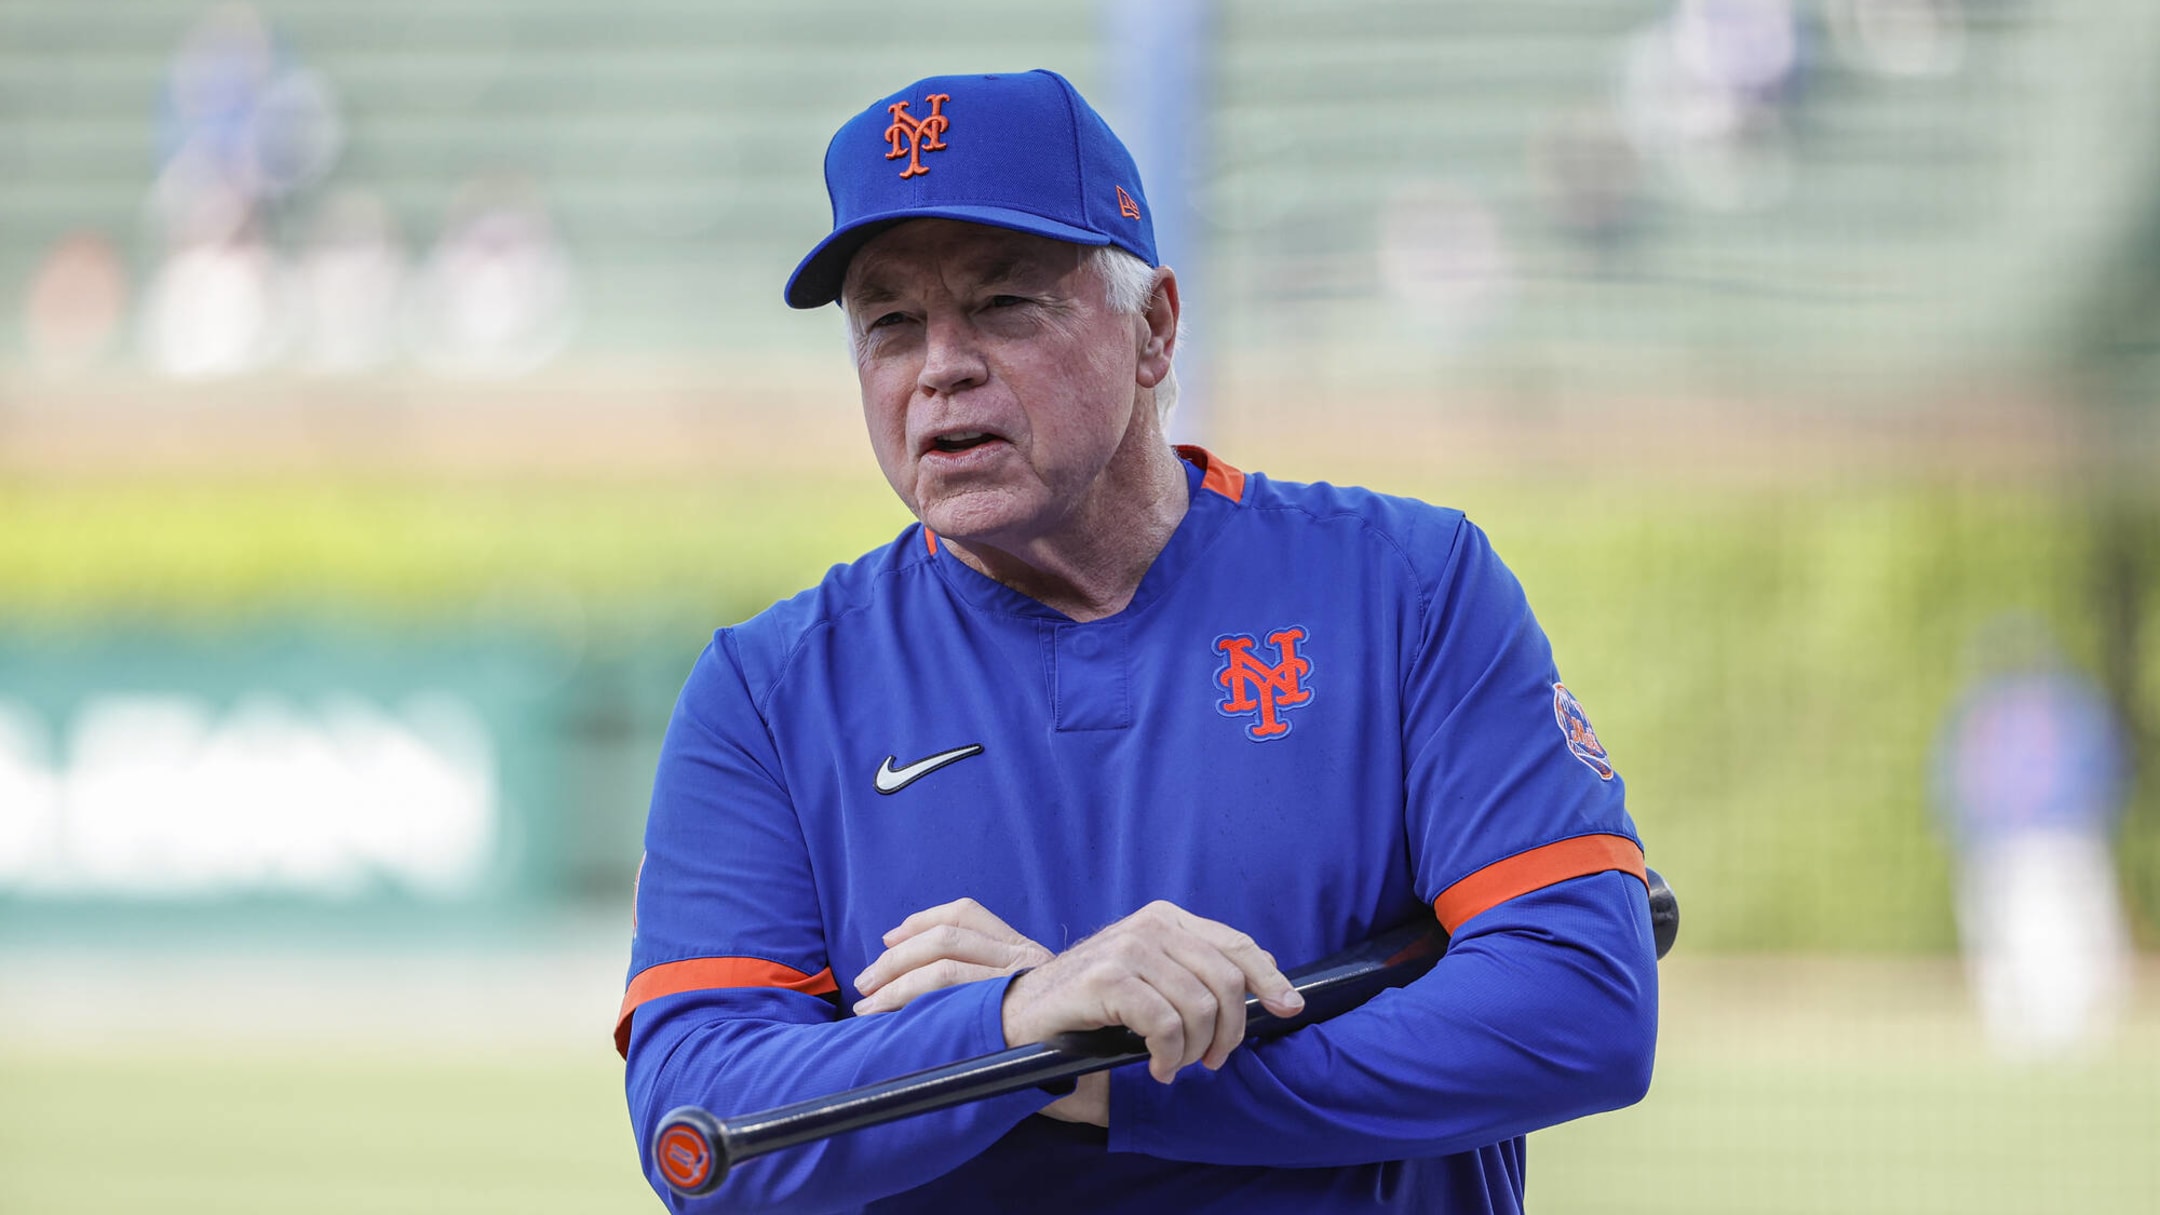 Buck Showalter wanted Mets players to have 'Coming to America' jackets